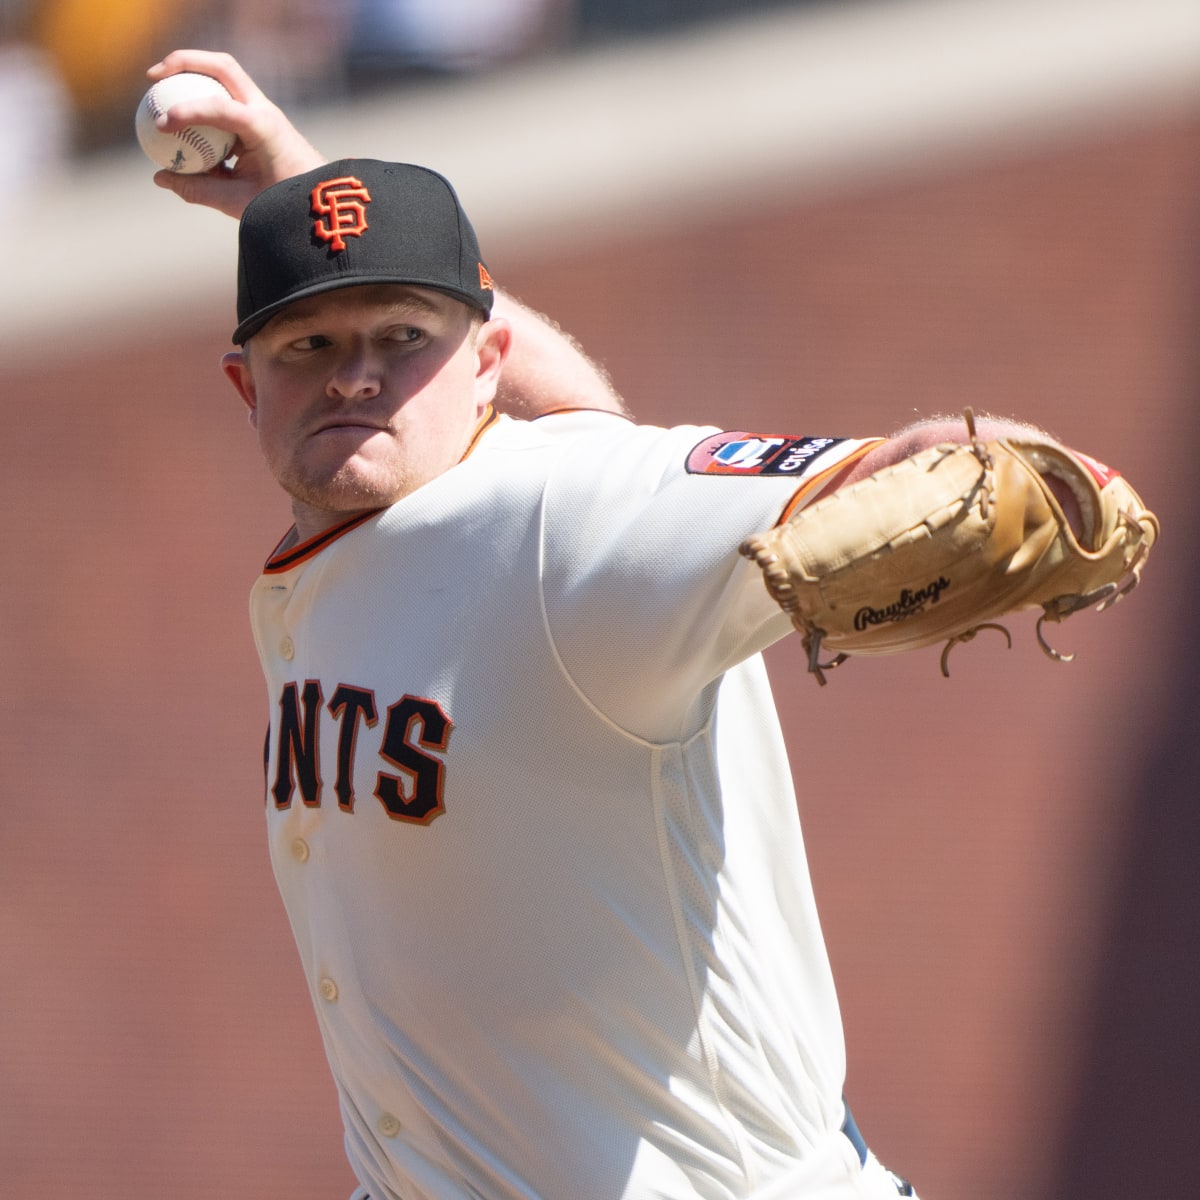 Giants' Logan Webb and his quest for old-school pitching endurance